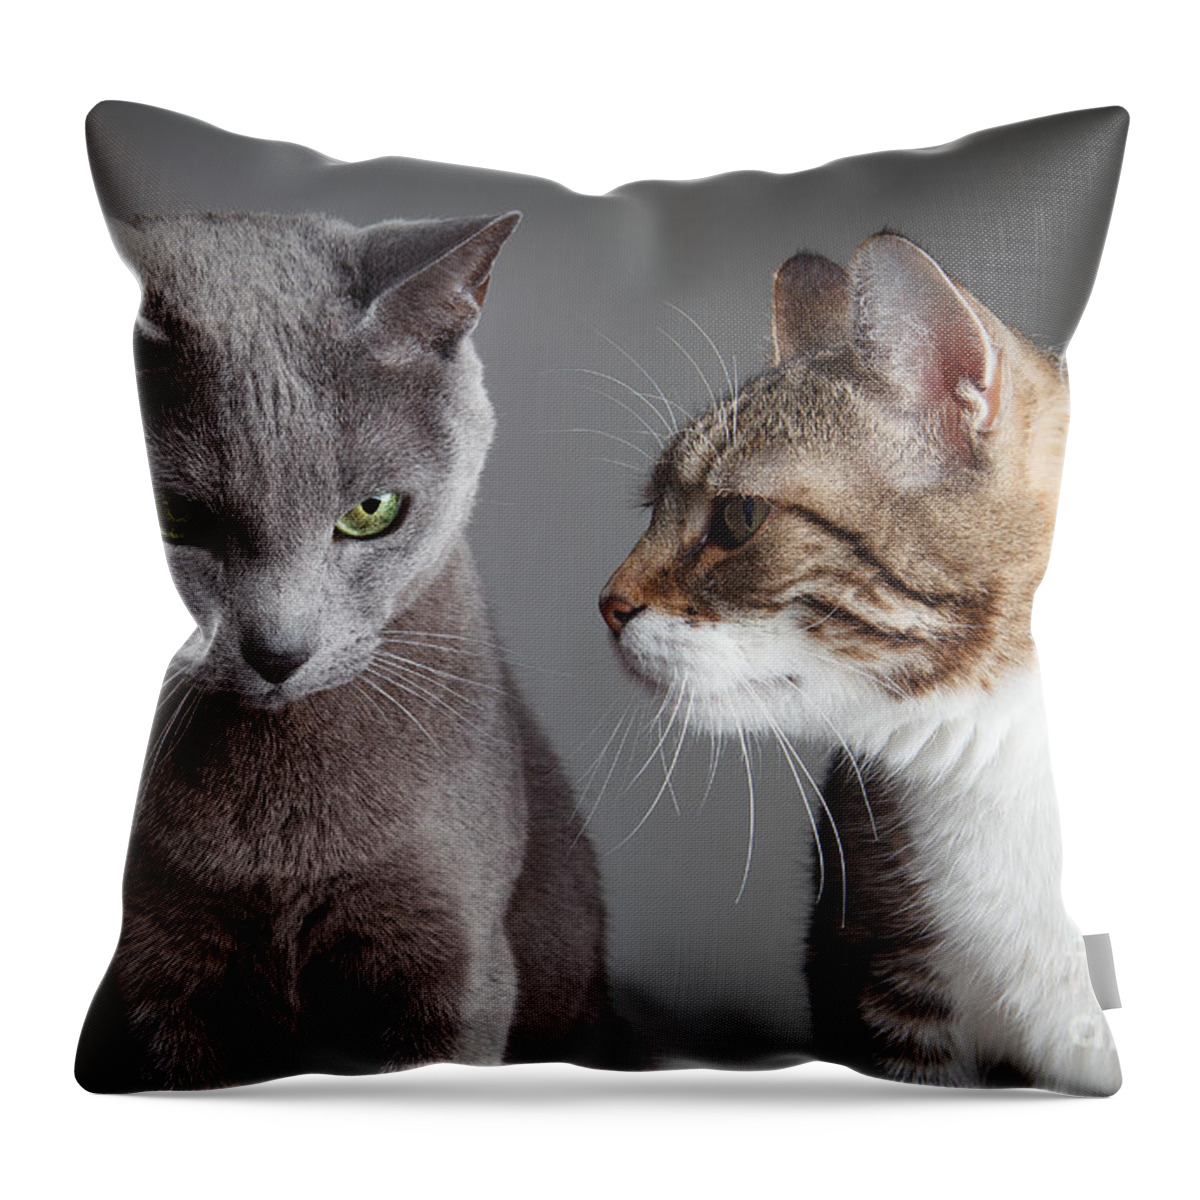 Cat Throw Pillow featuring the photograph Two Cats by Nailia Schwarz